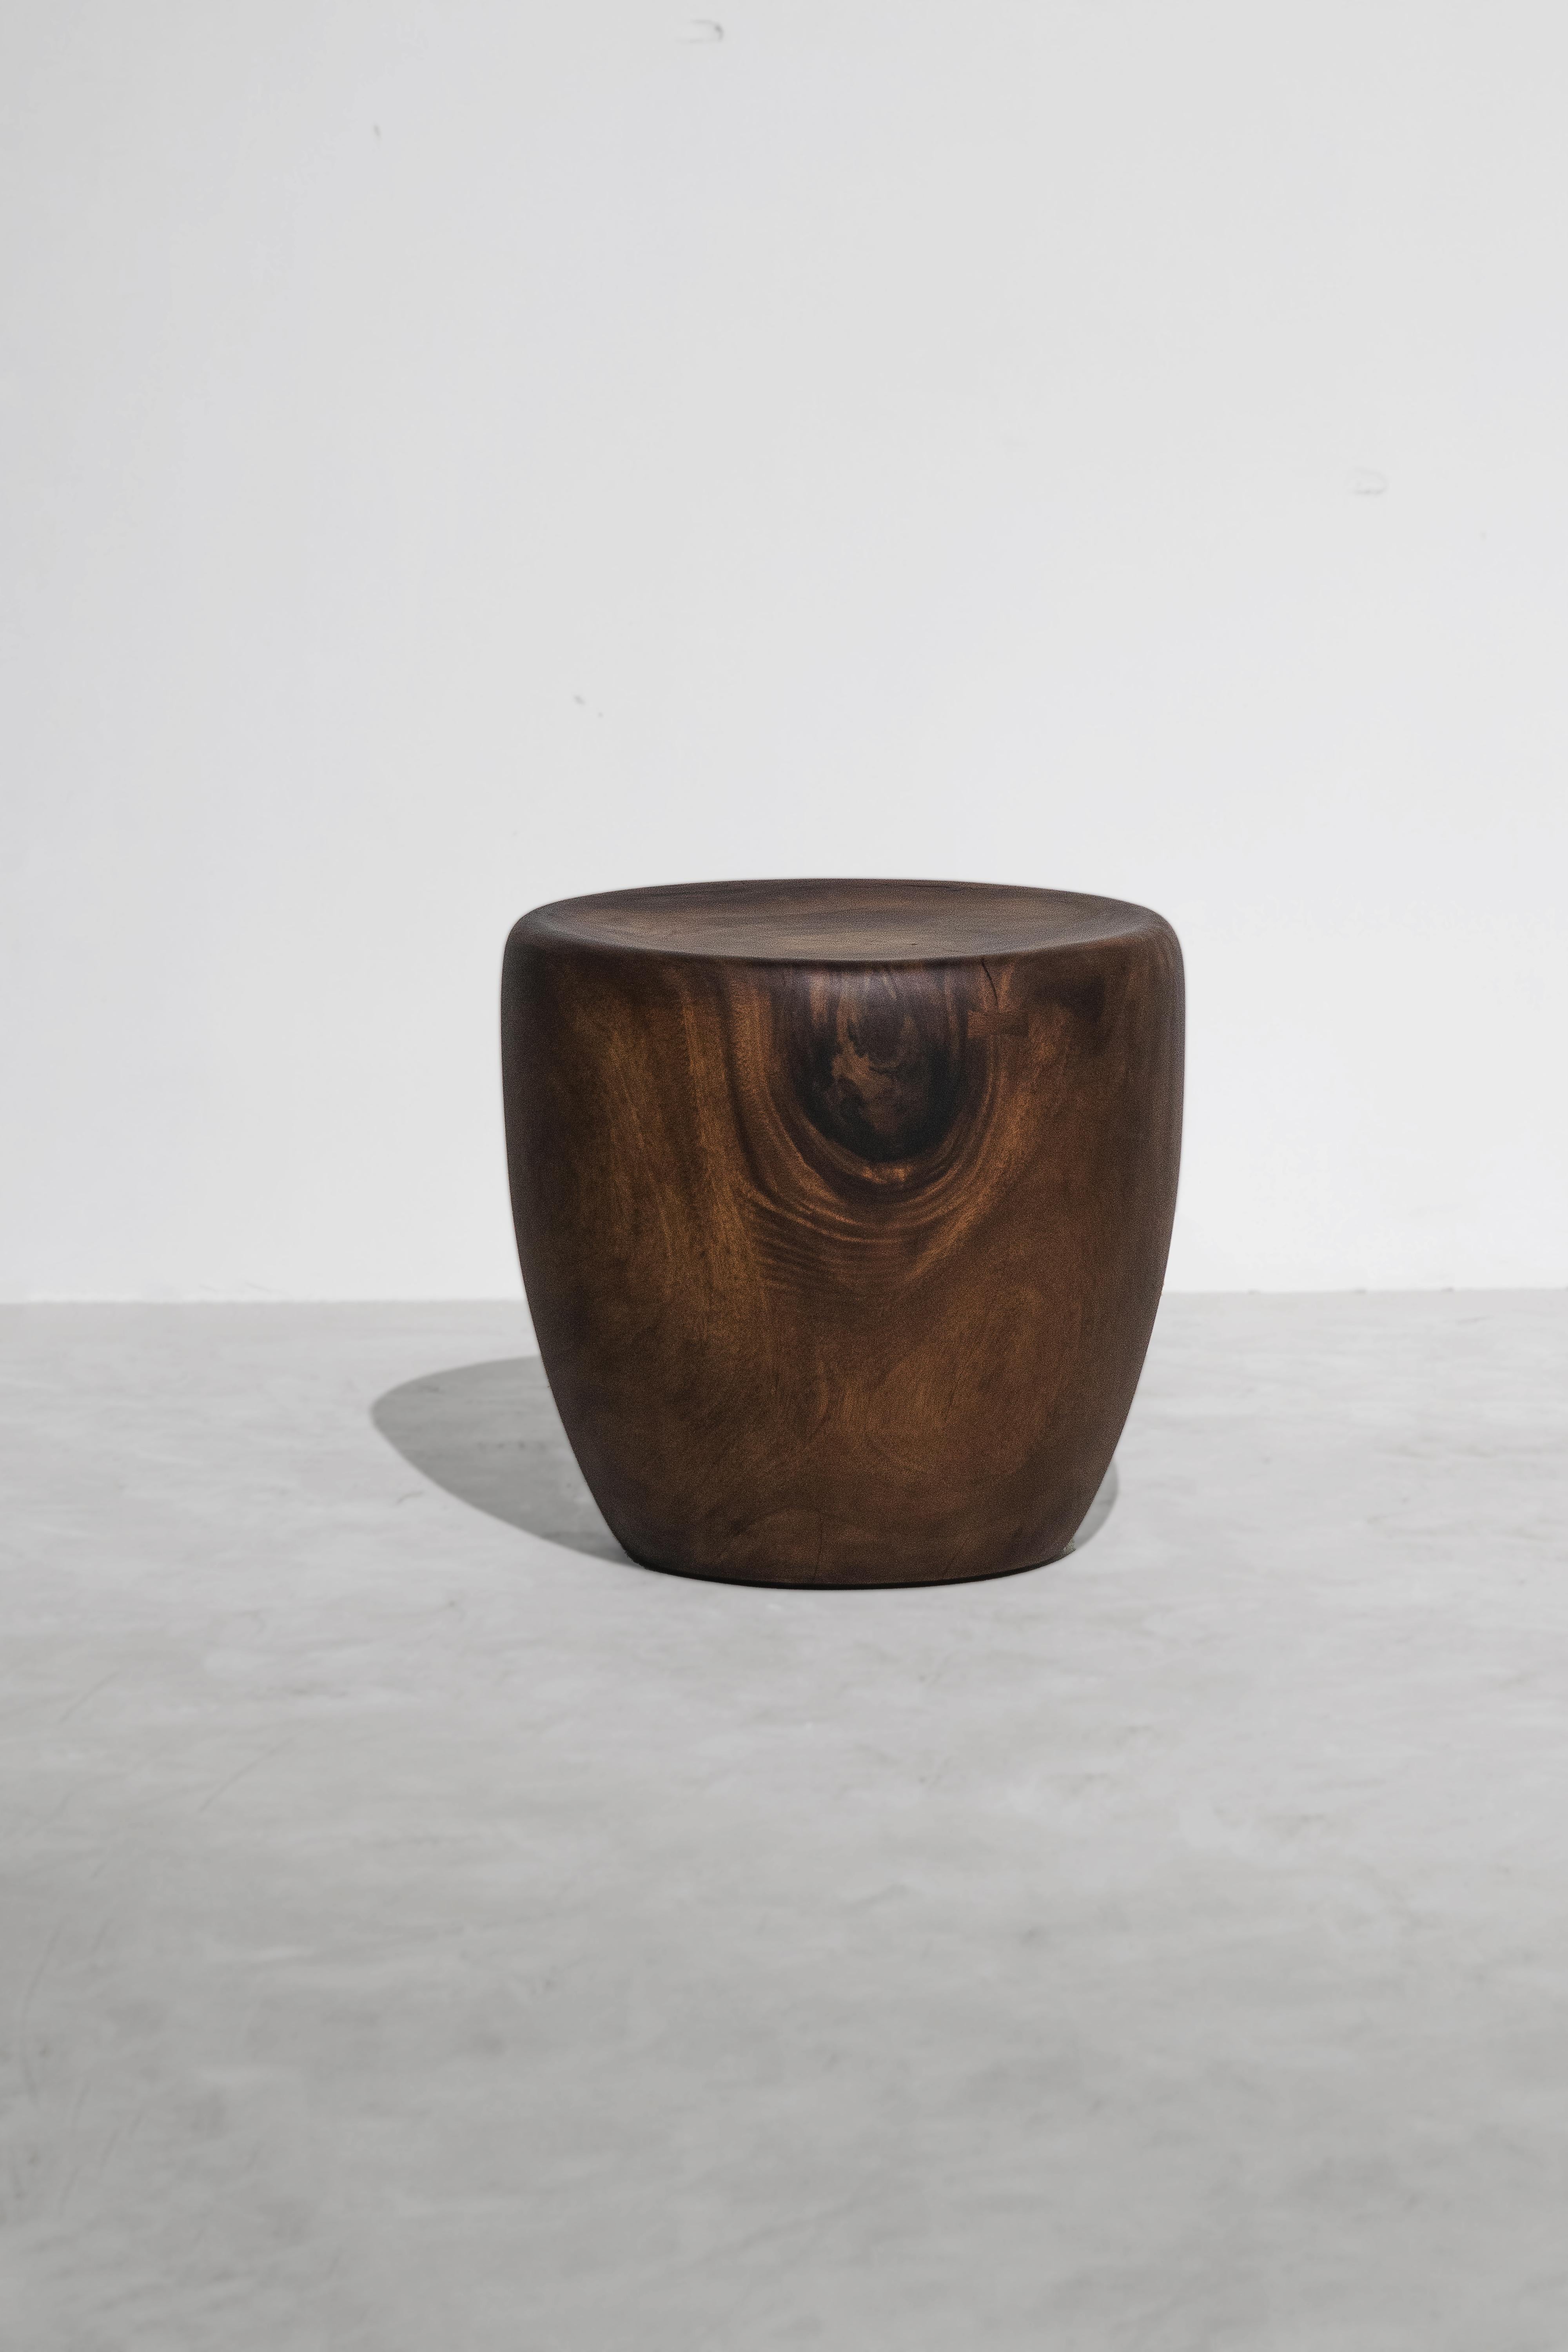 Discover the allure of Chiang Mai craftsmanship with our exclusive Monkey Pod Stool, now available on 1stdibs. Handcrafted by skilled artisans in the heart of Northern Thailand, each stool is a testament to centuries-old techniques and a celebration